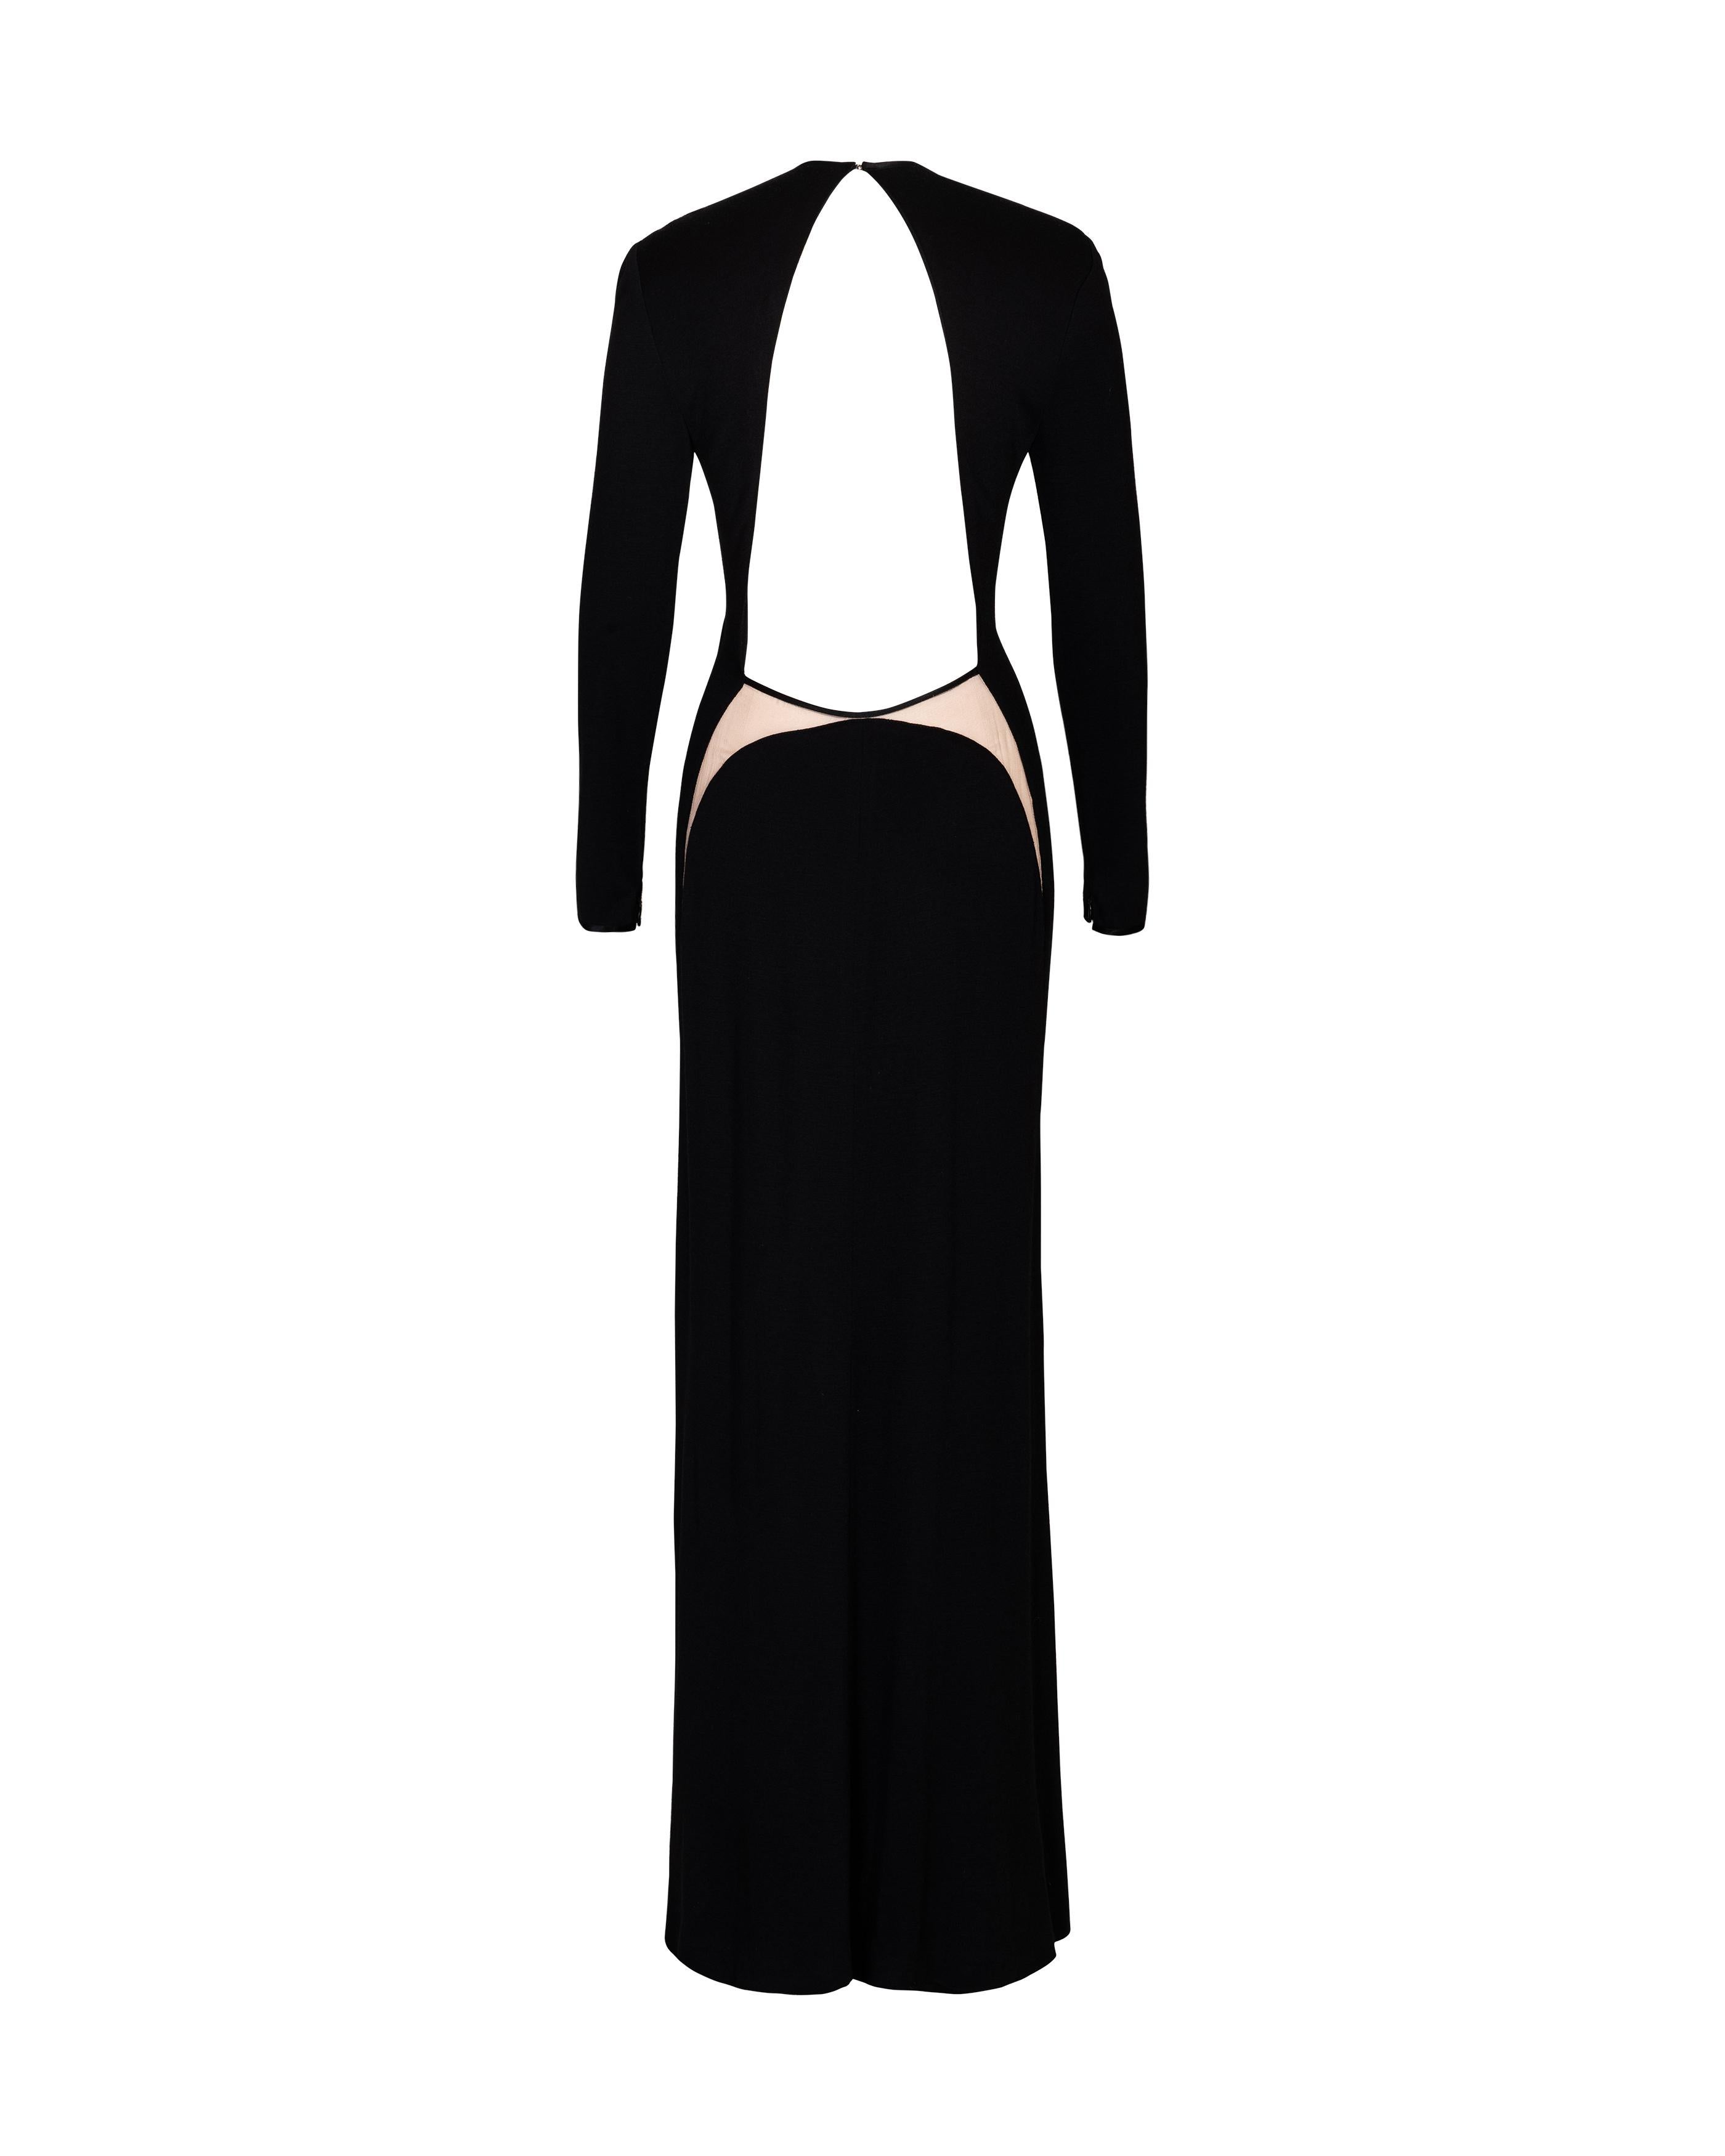 A/W 1989 Geoffrey Beene Black Long Sleeve Open-back Gown In Excellent Condition In North Hollywood, CA